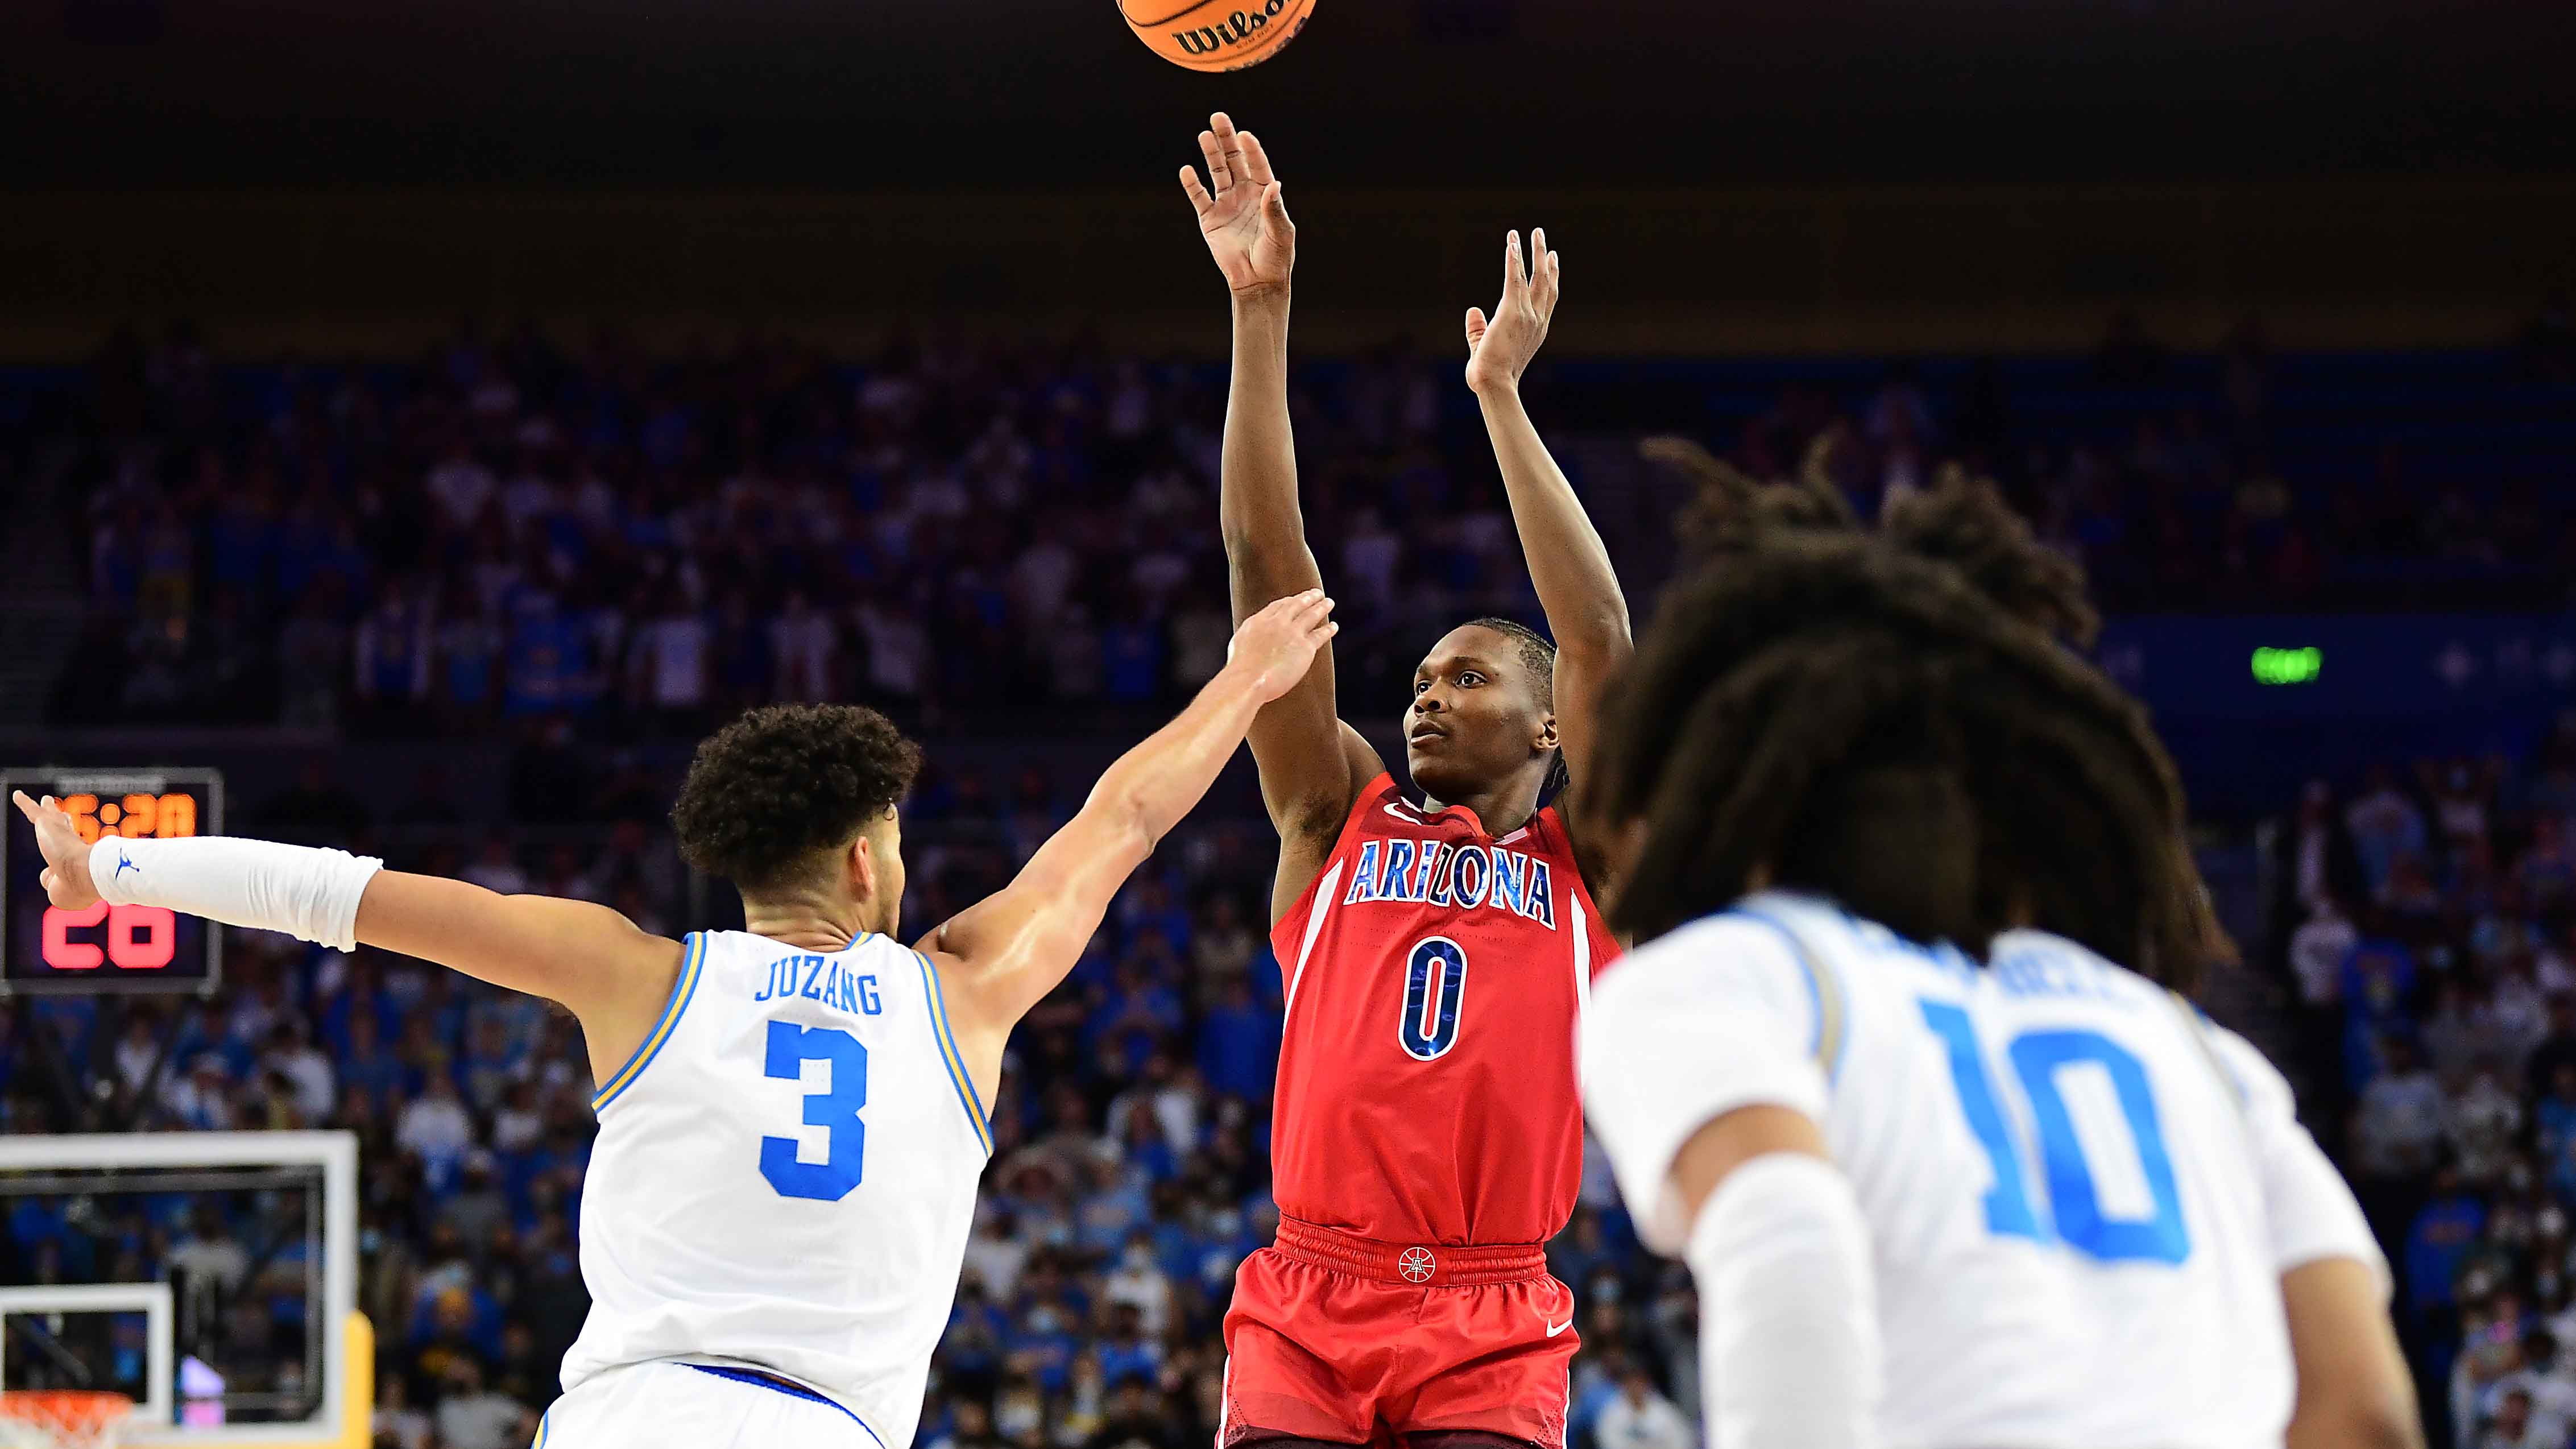 Here's How to Watch the 2022 Pac-12 Basketball Tournament